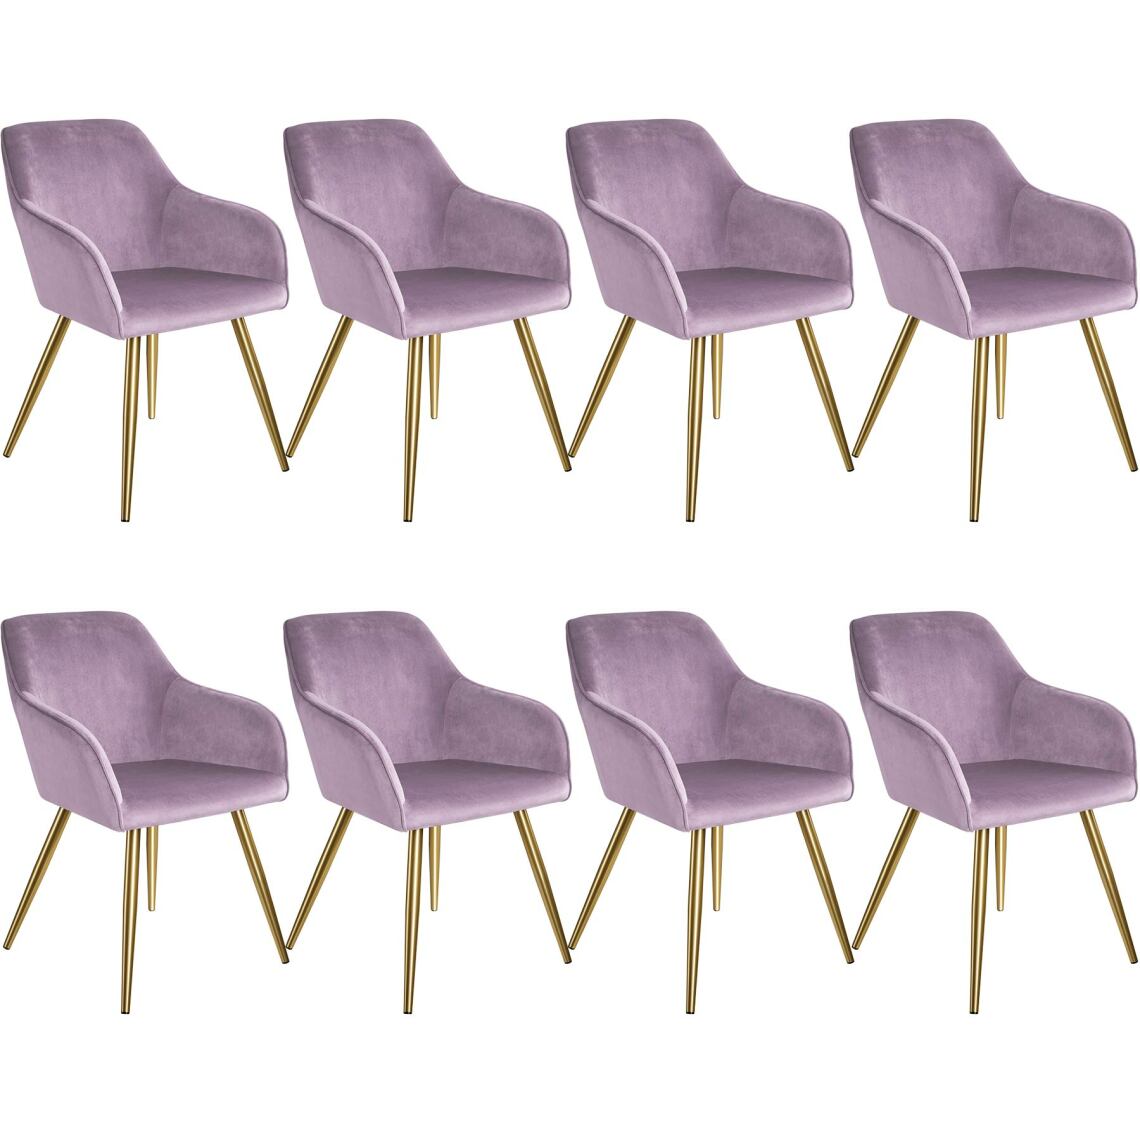 Tectake - 8 Chaises MARILYN Effet Velours Style Scandinave - violet clair/or - Chaises